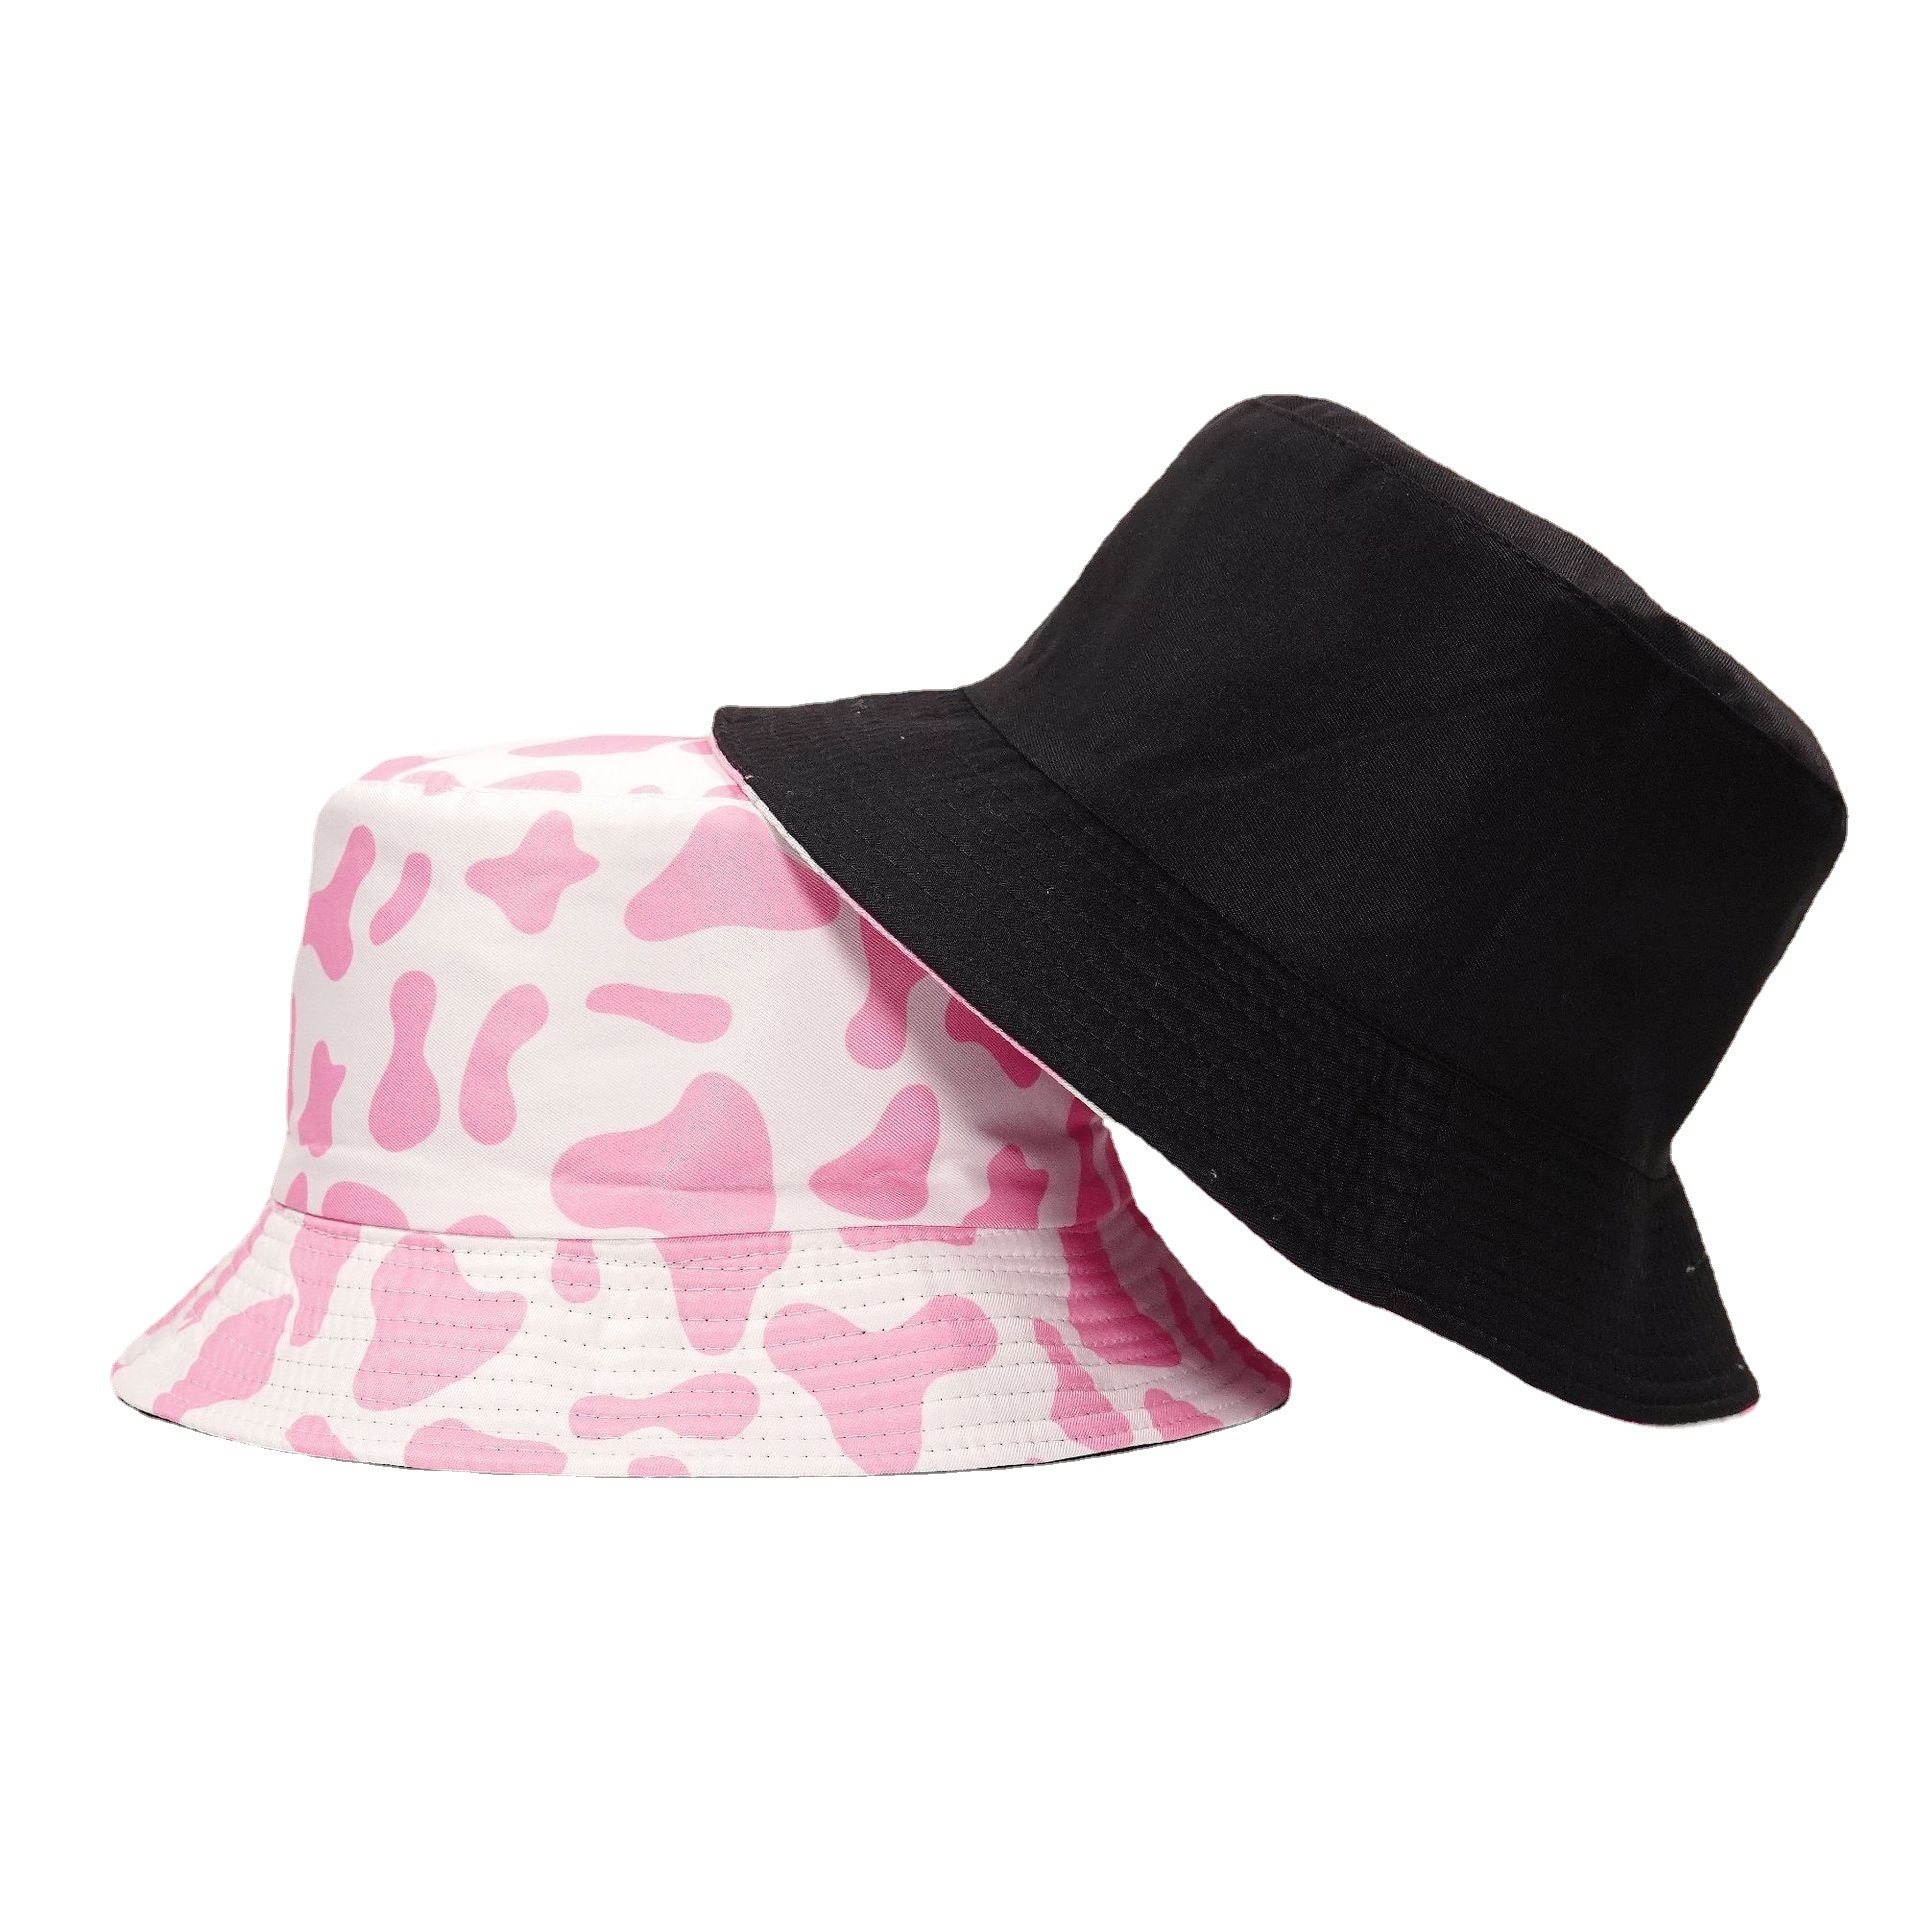 2021 New Summer Reversible Pink Cow Print Bucket Hats Men Women Striped Bob Outddor Street Casual 5 - The Cow Print